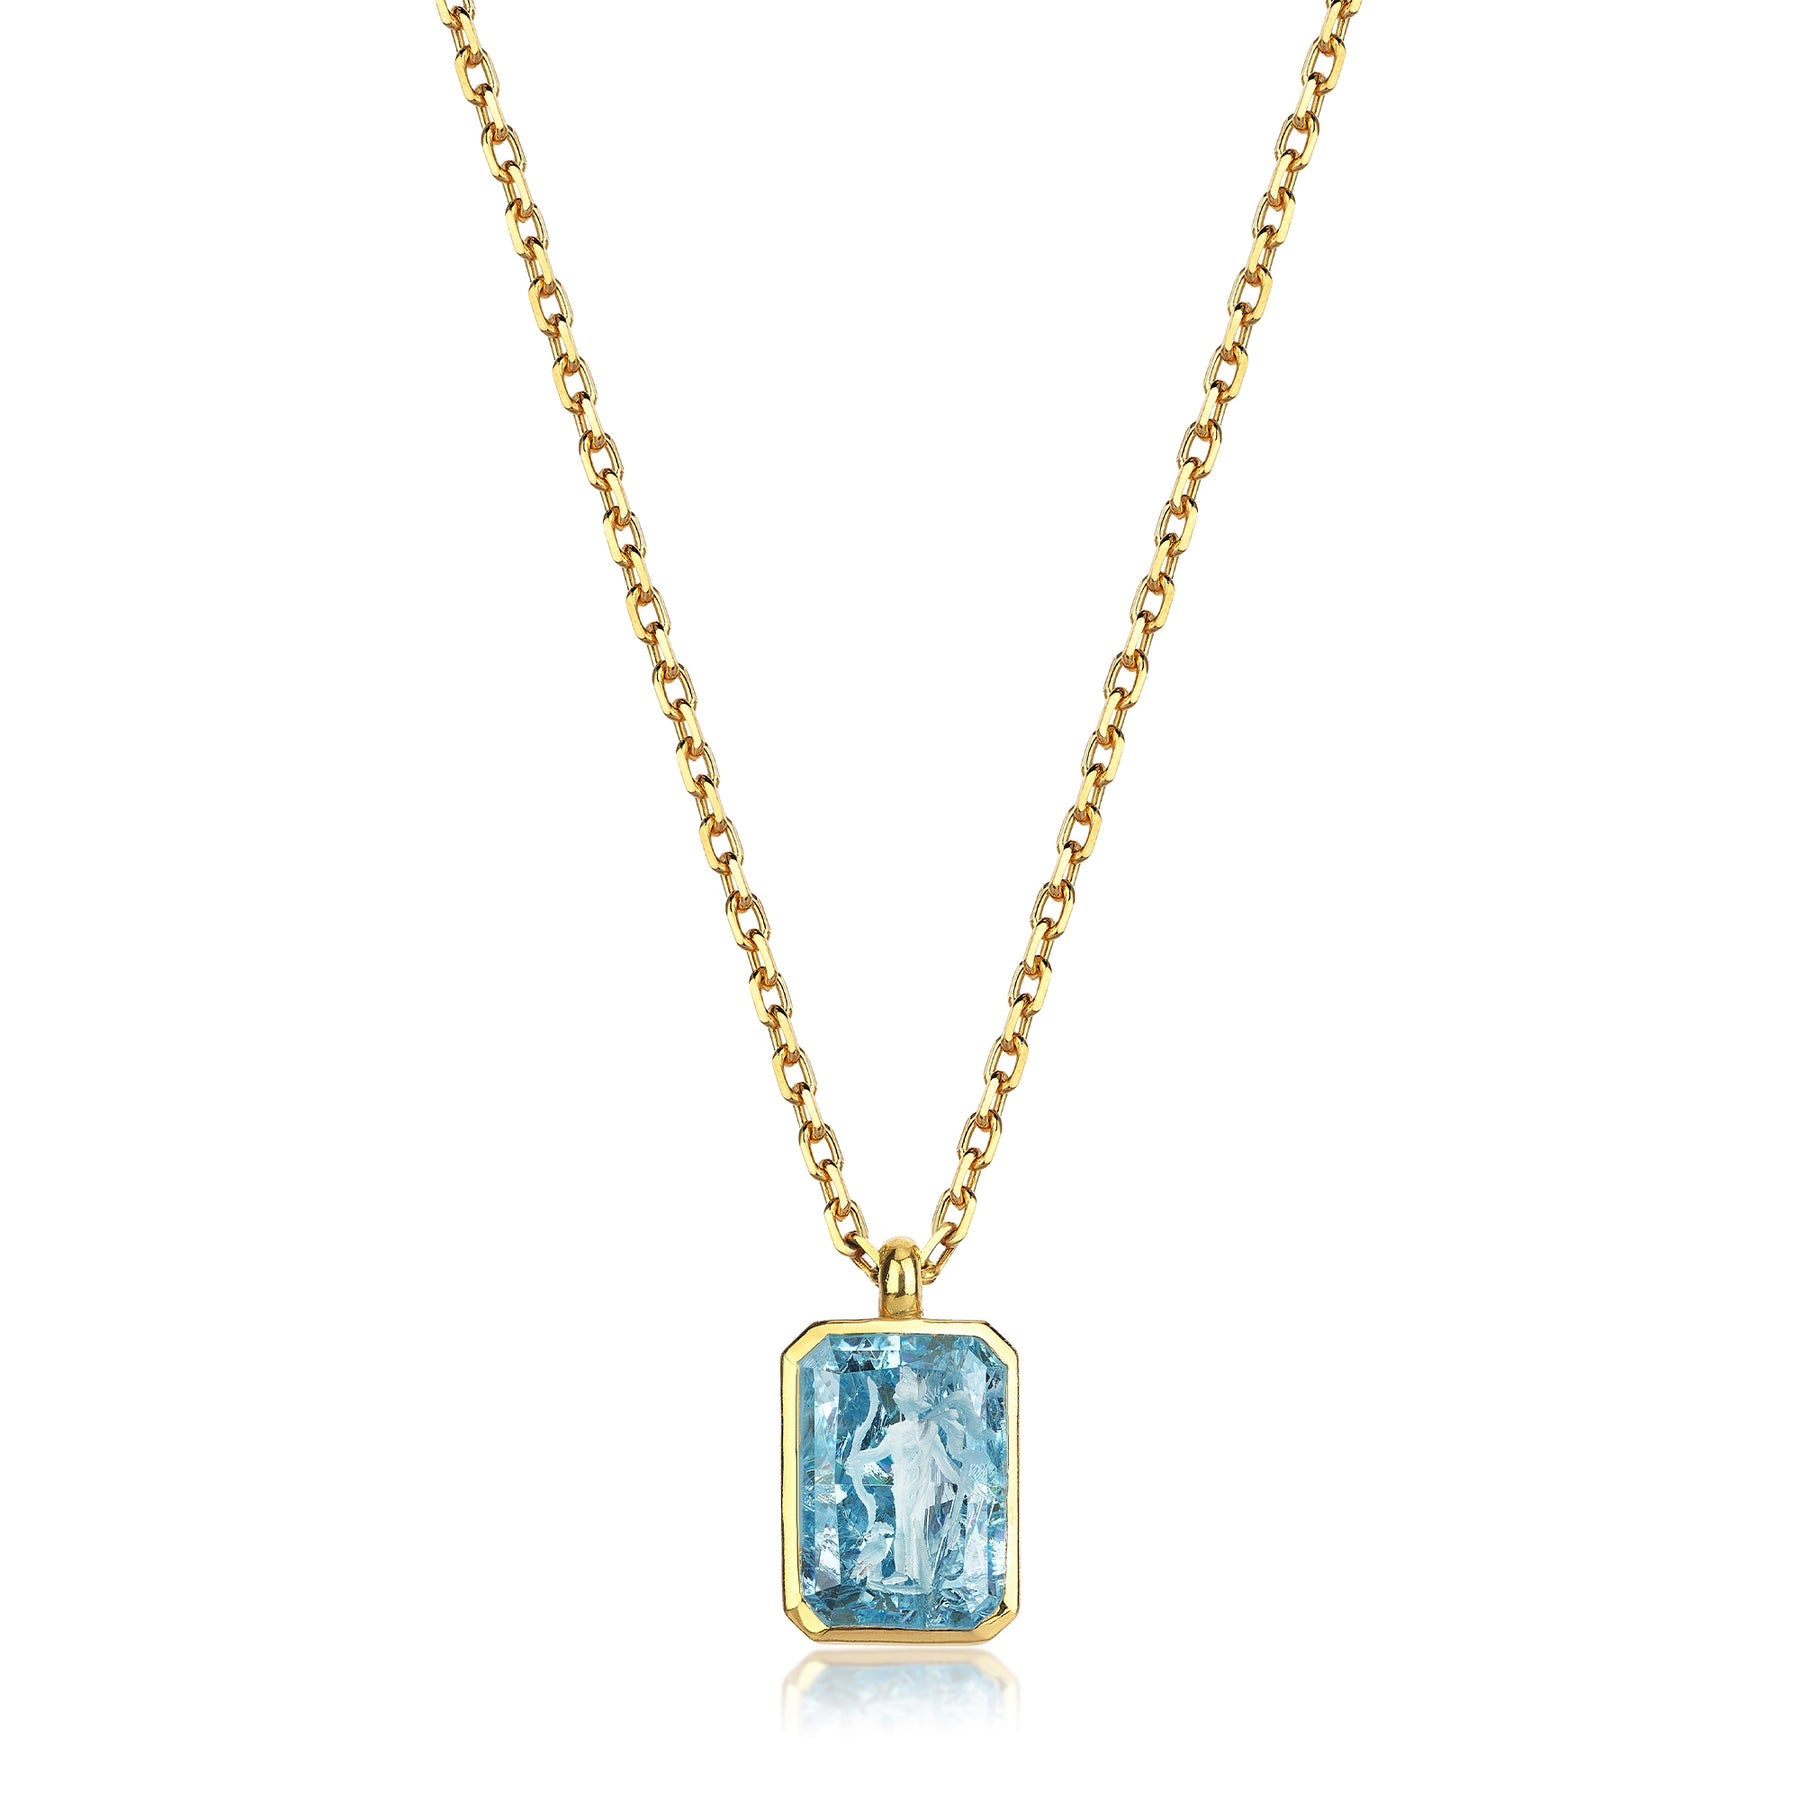 The Blue Angel Necklace